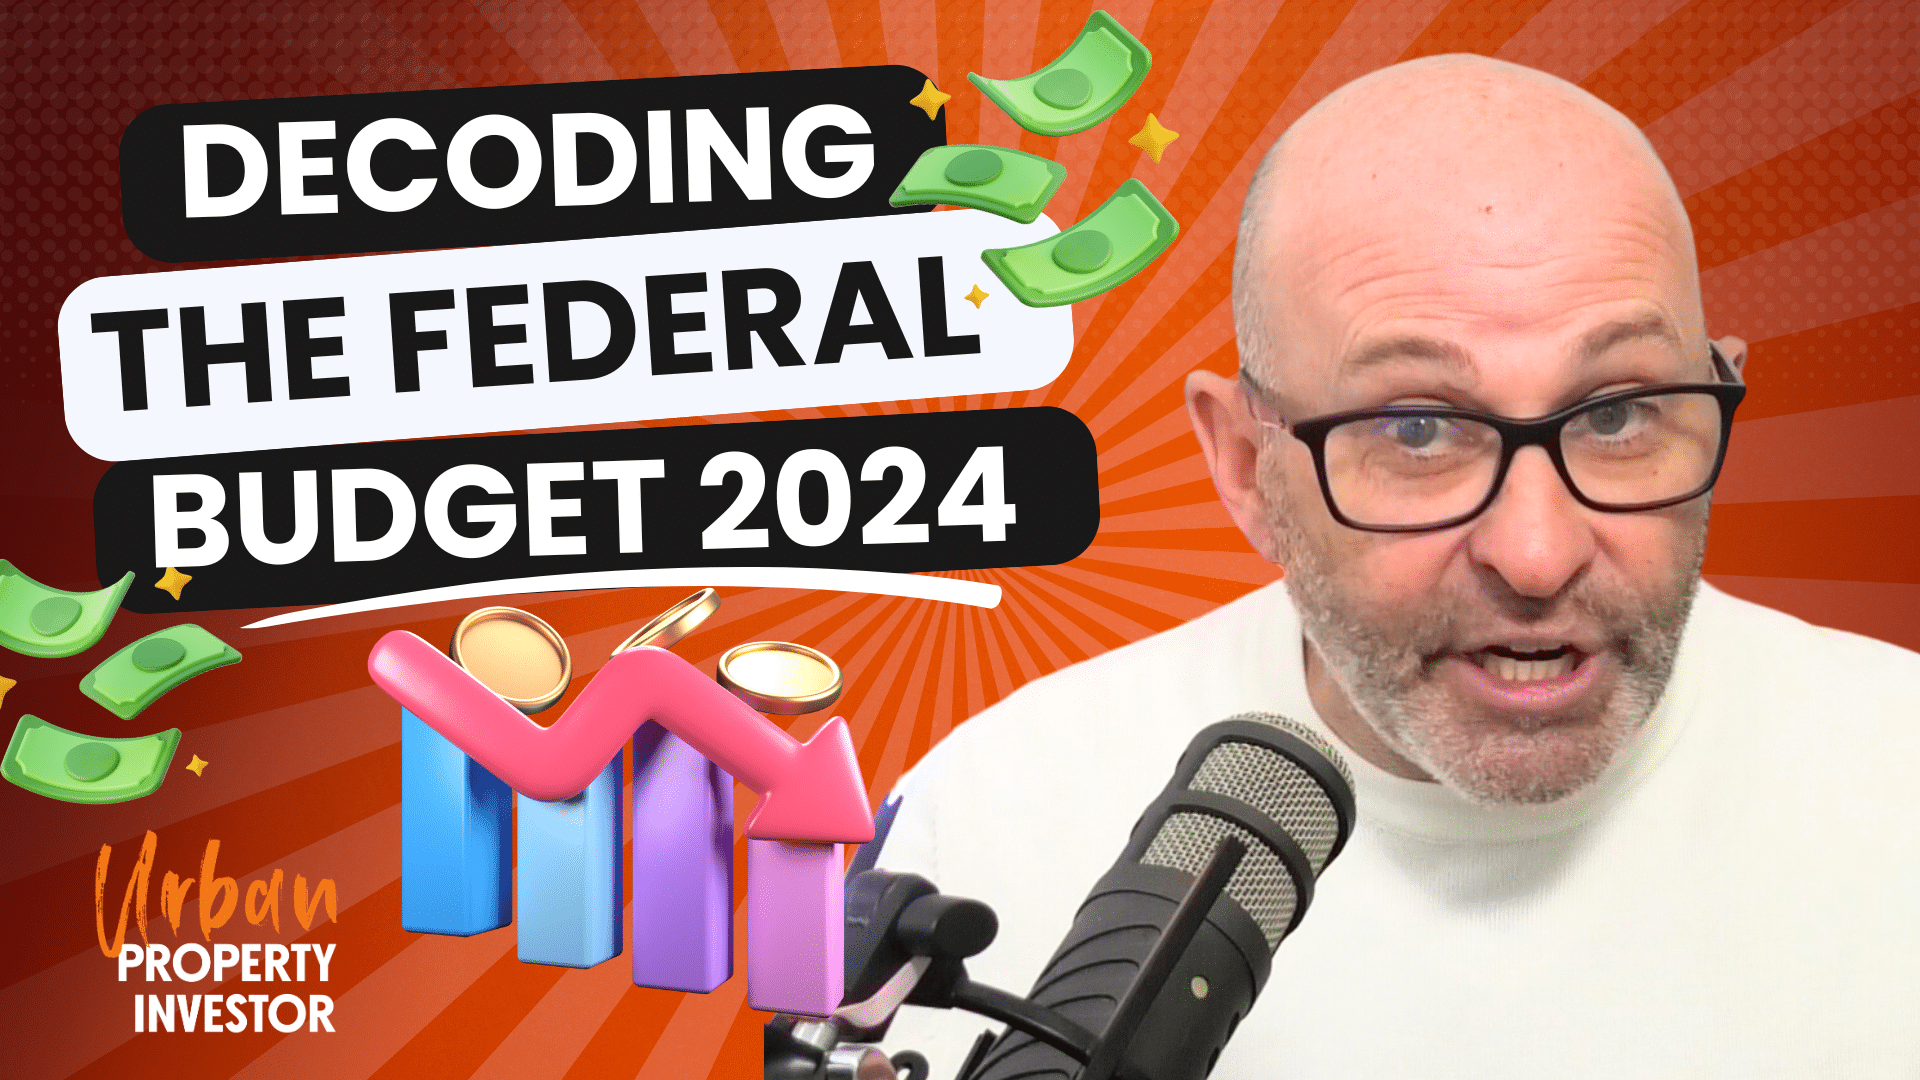 Decoding The Federal Budget 2024